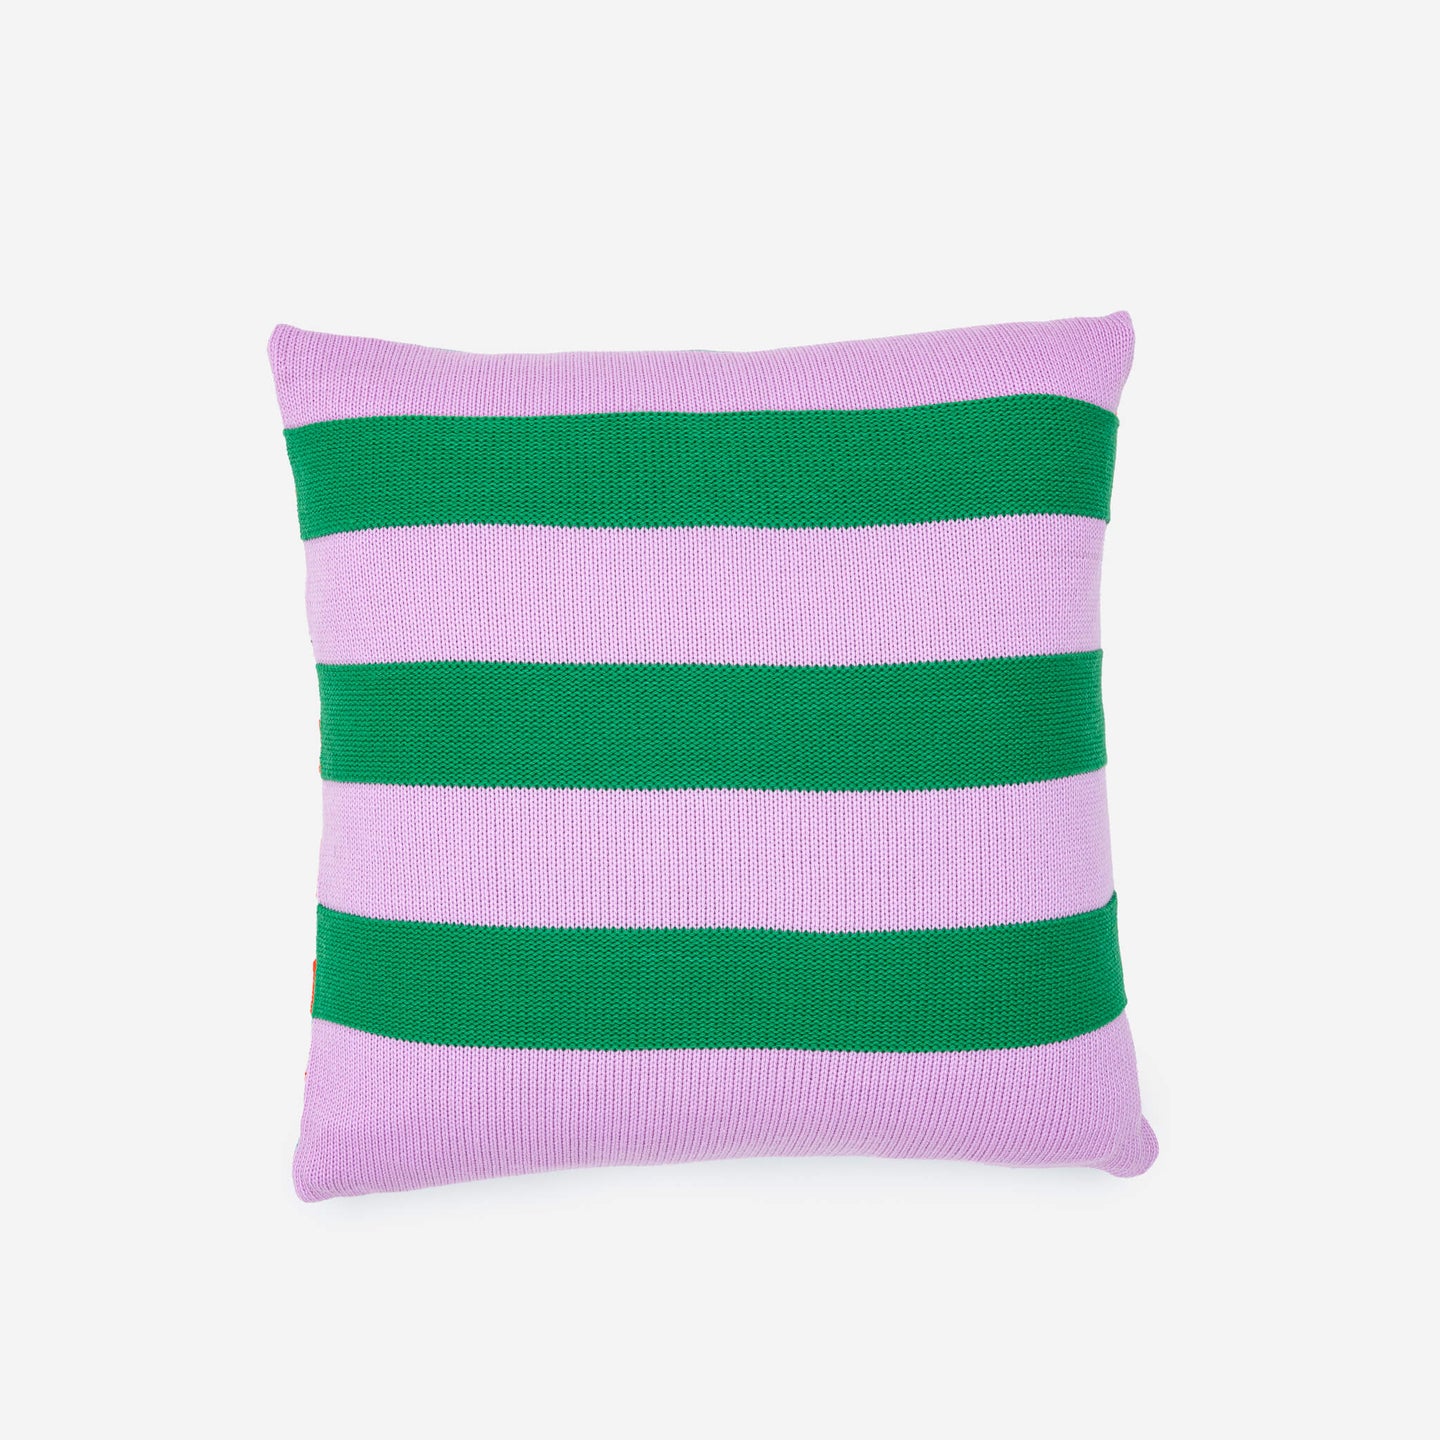 Super Stripe Raised Textured Pillow Cover Accent Colorful Green Purple Lilac